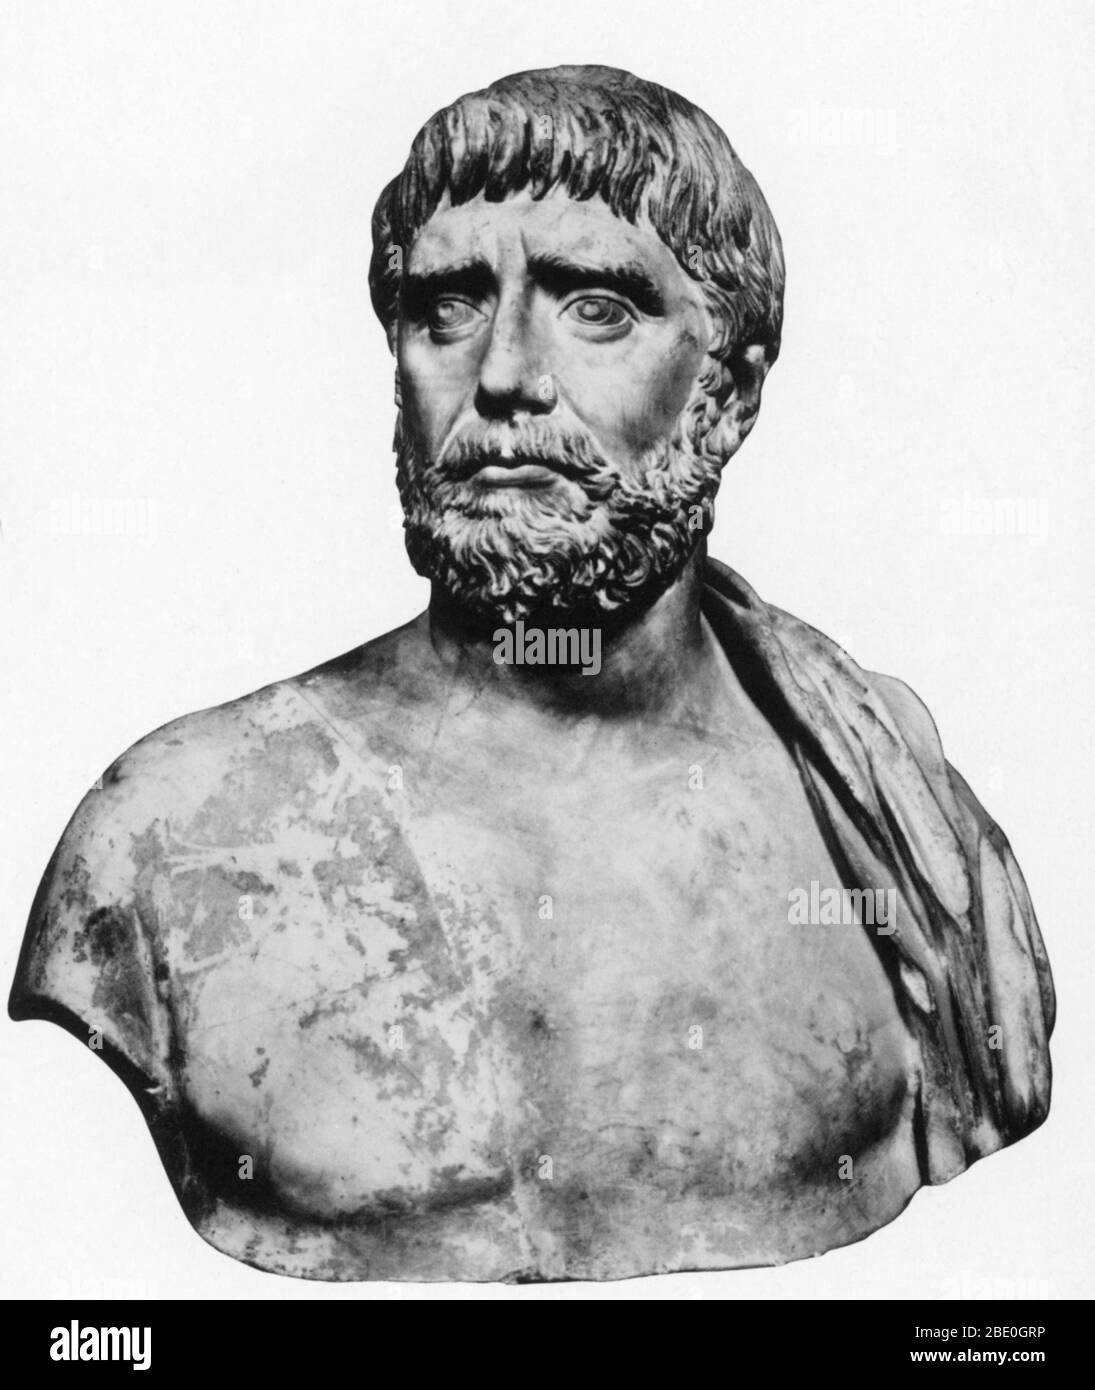 Thales of Miletus (624-546 BC) was a pre-Socratic Greek philosopher,  mathematician, astronomer, the first identifiable scientist and one of the  Seven Sages of Greece. Thales attempted to explain natural phenomena  without reference